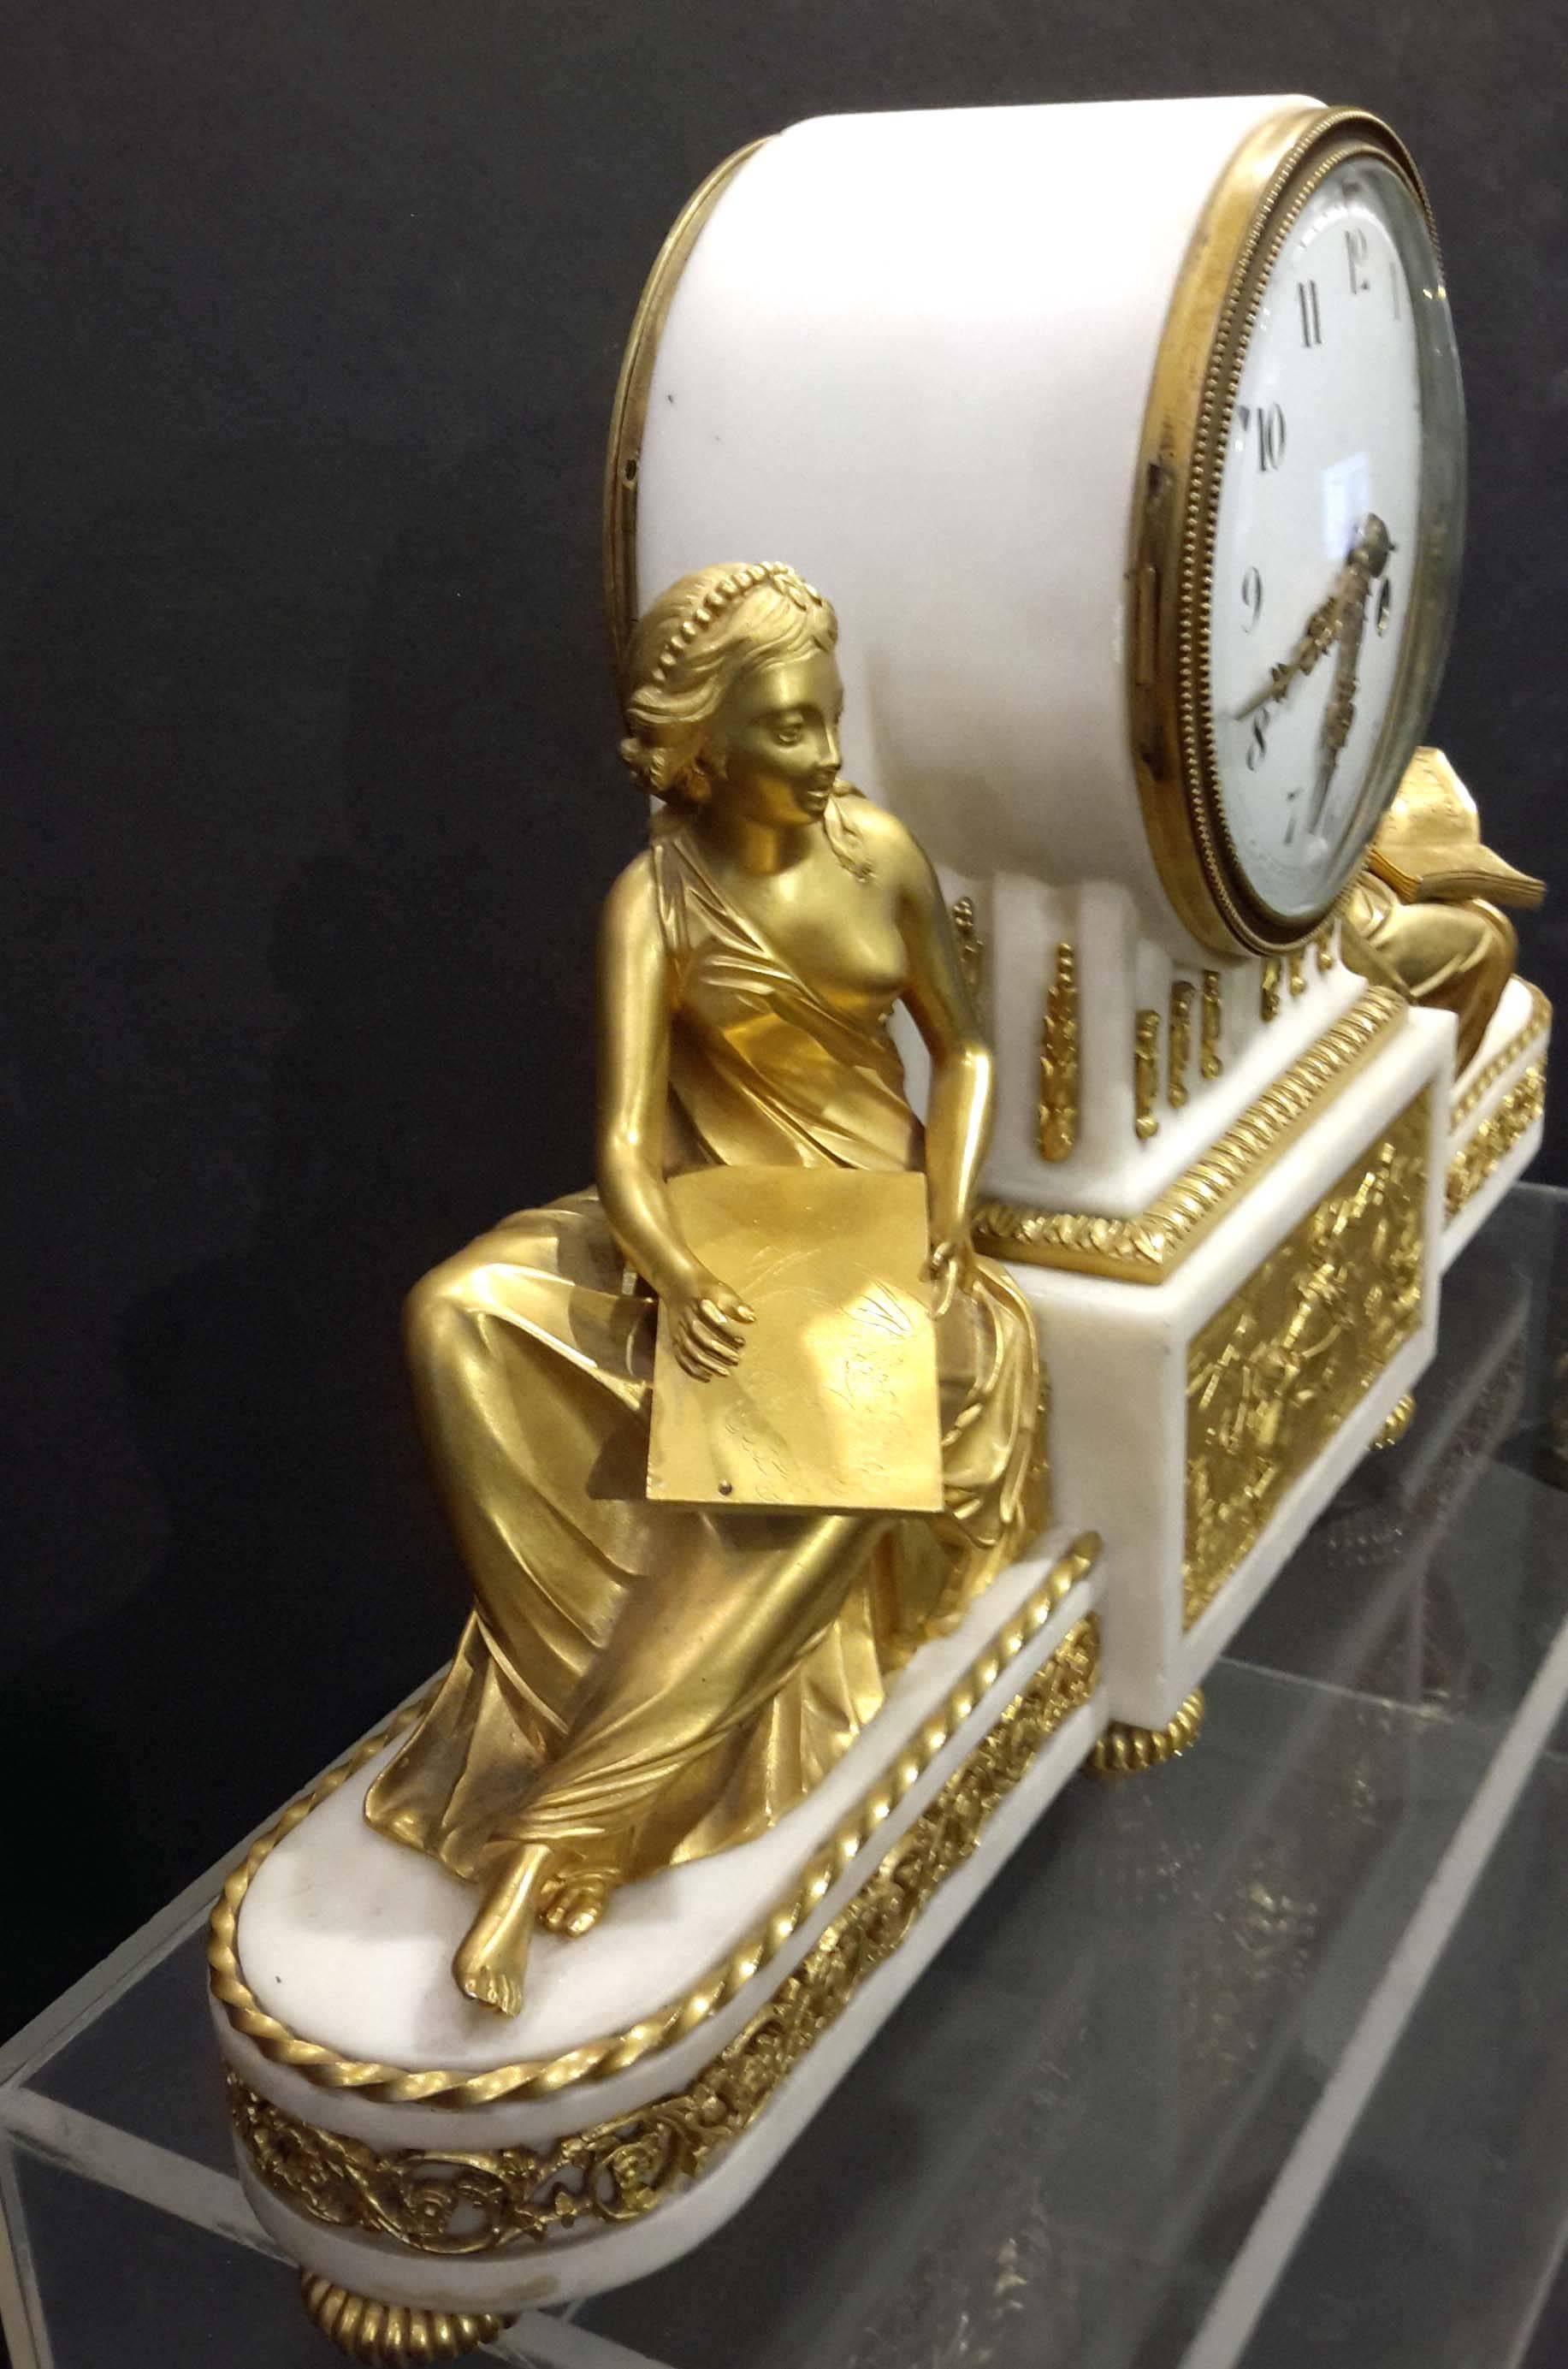 Bronzes in style of François Rémond. Great quality French gilt bronze and Carrara marble mantel clock. White enamel dial. Movement is intact.
François Rémond (circa 1747-1812)
Along with Pierre Gouthière, he was one of the most important Parisian